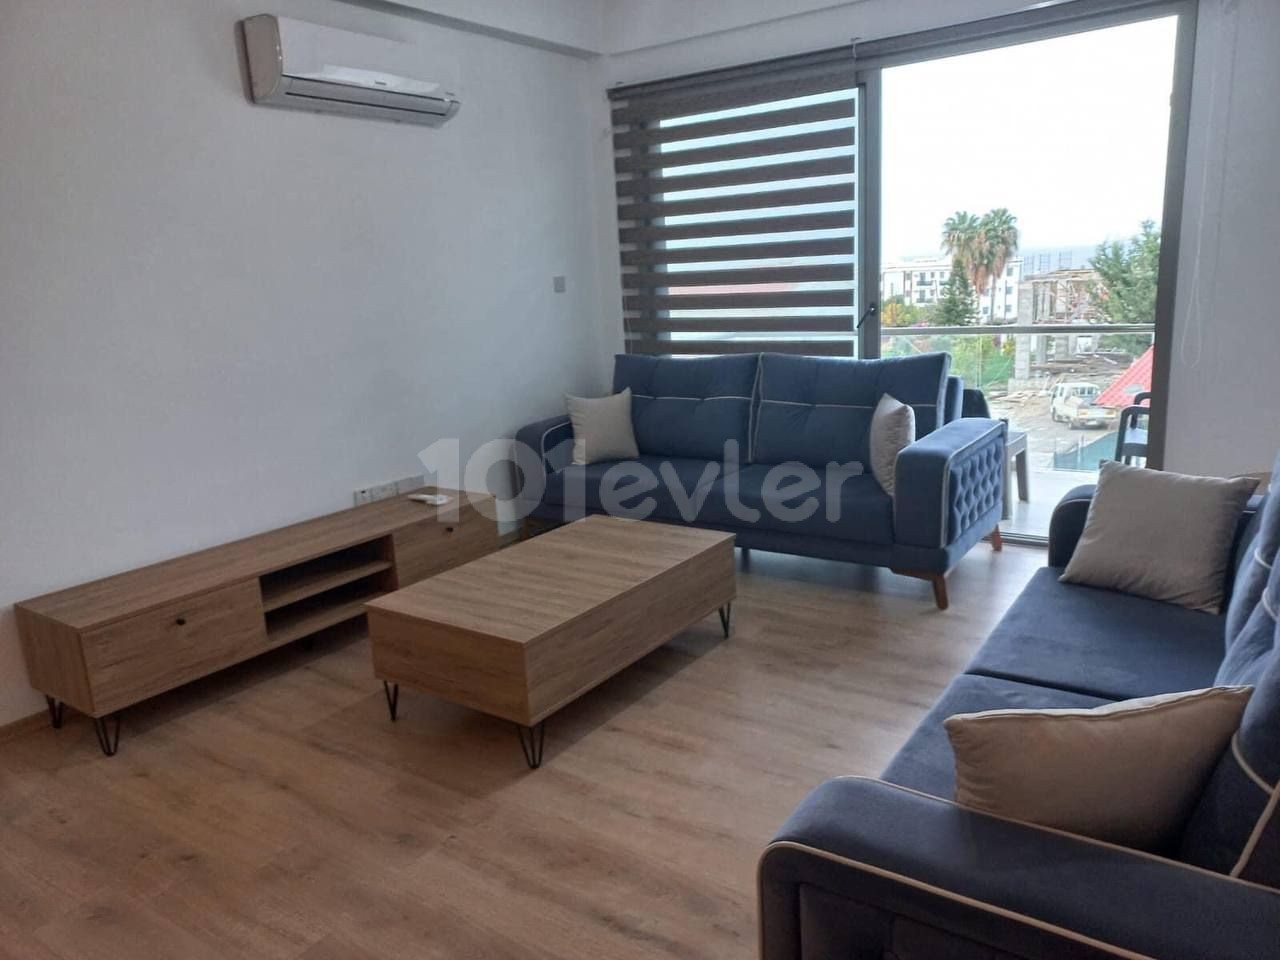 2+1 flat for rent with furniture and white goods in Kyrenia - Lapta.